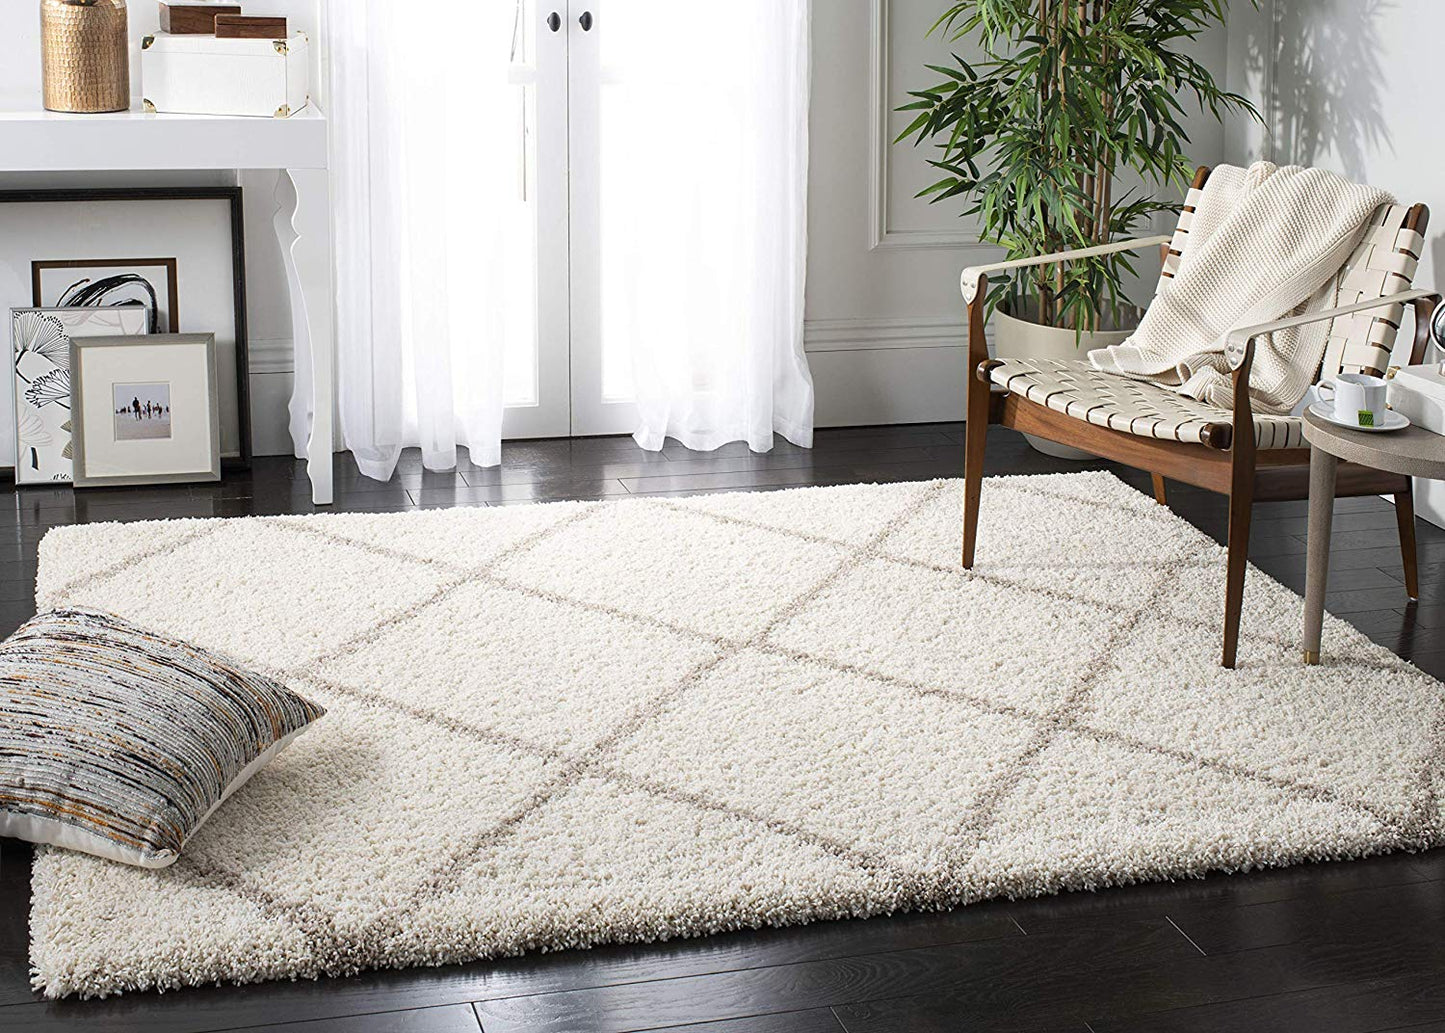 Kashyapa Rugs Collection - Diamond Shaggy Design Rug Ivory with Beige Lines Microfiber Hand tufted Carpet.